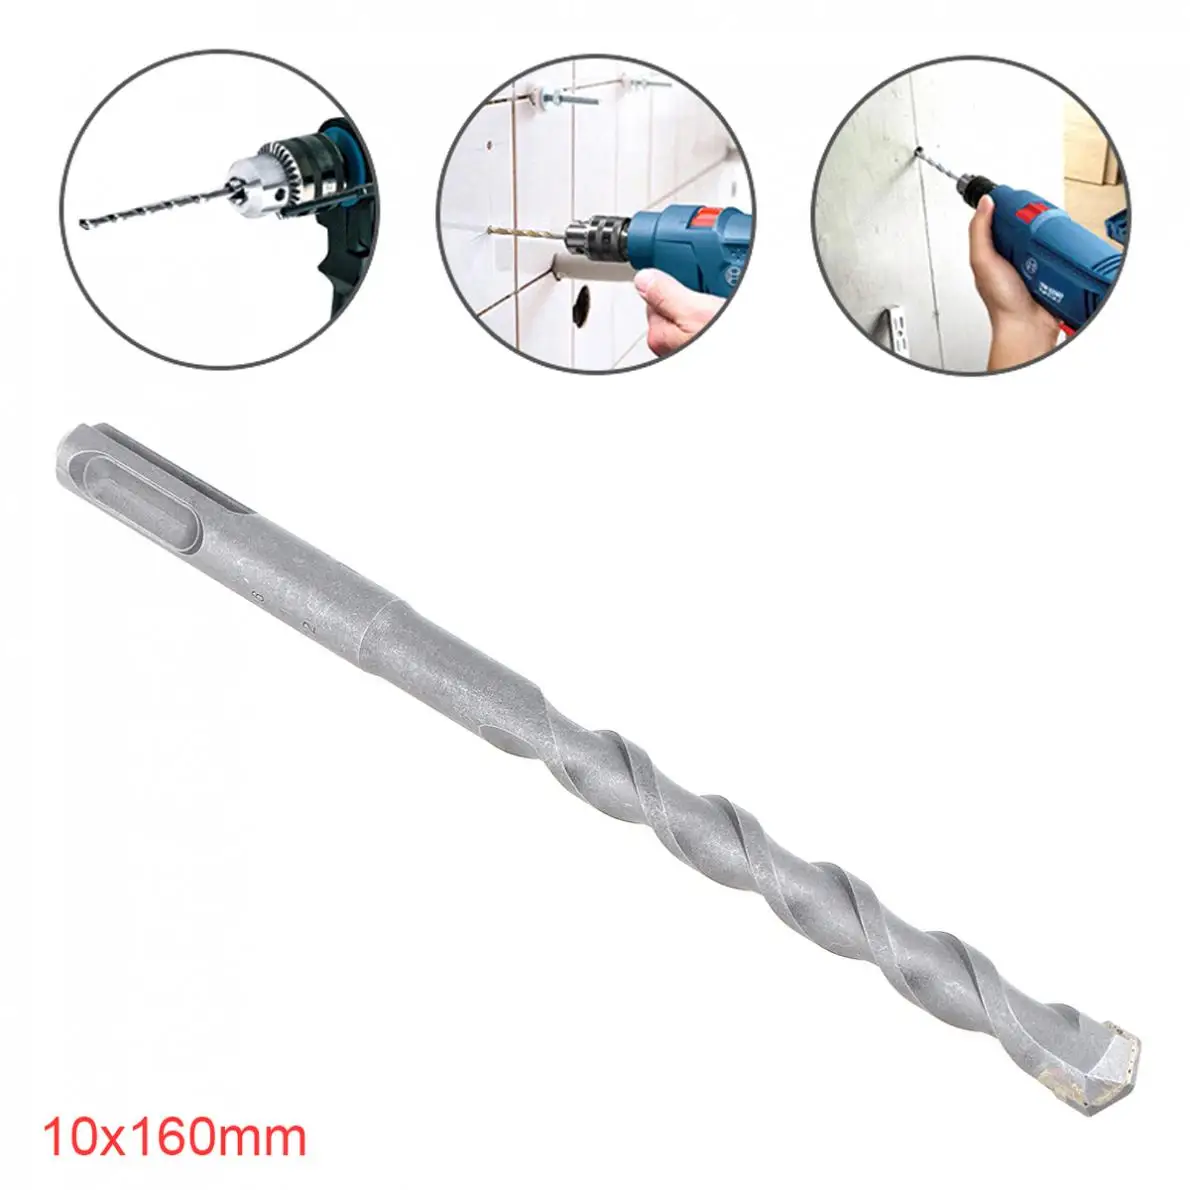 

1pc 10x160mm Round Shank Rotary Hammer Concrete Masonary Drill Bit for Electric Drills / Drilling Machines